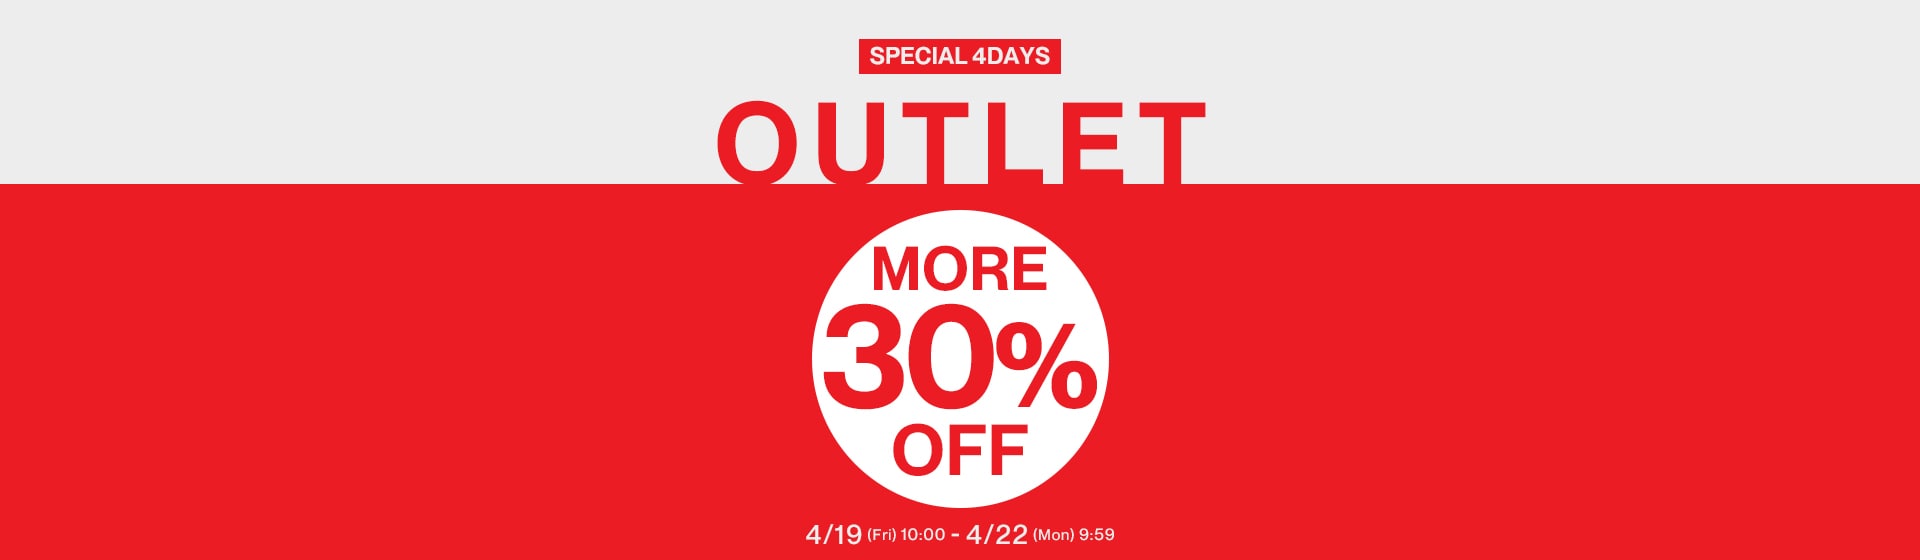 OUTLET MORE 30%OFF